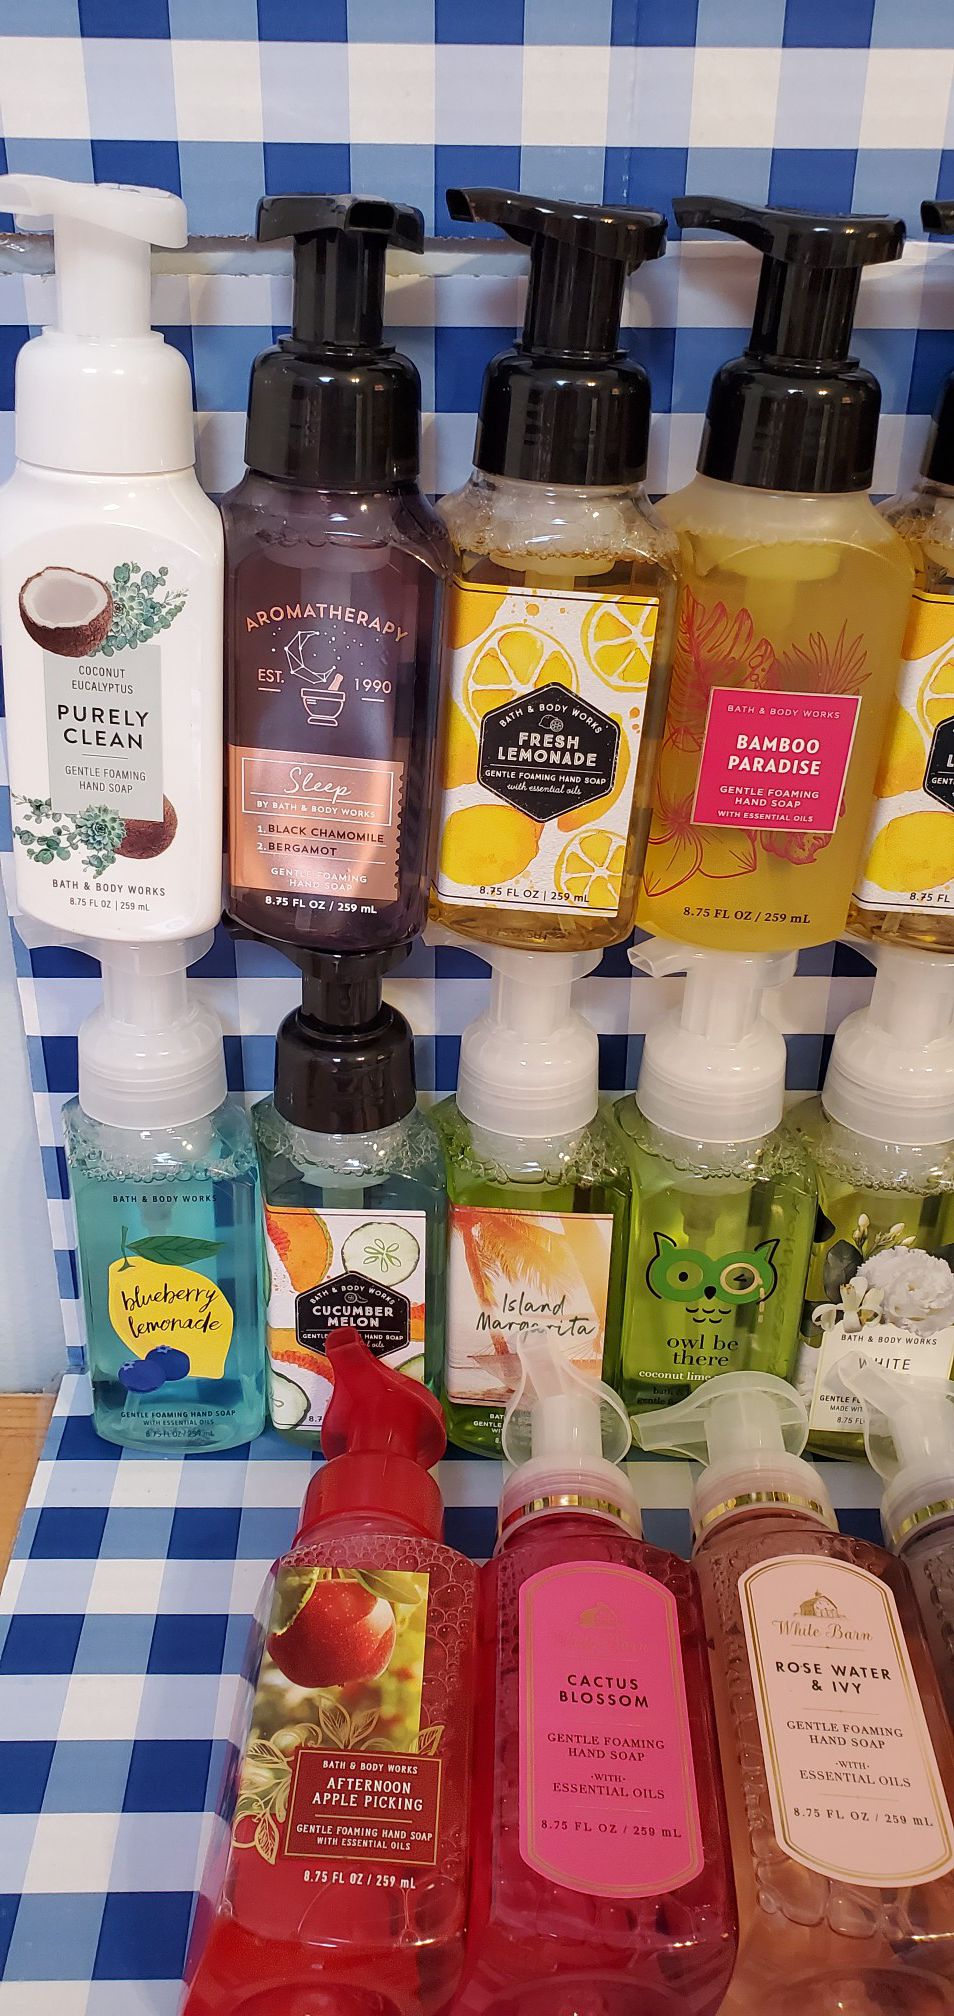 (24) Different Scents Brand New Bath And Body Works Gentle Foaming Hand Soap $6.00 Each